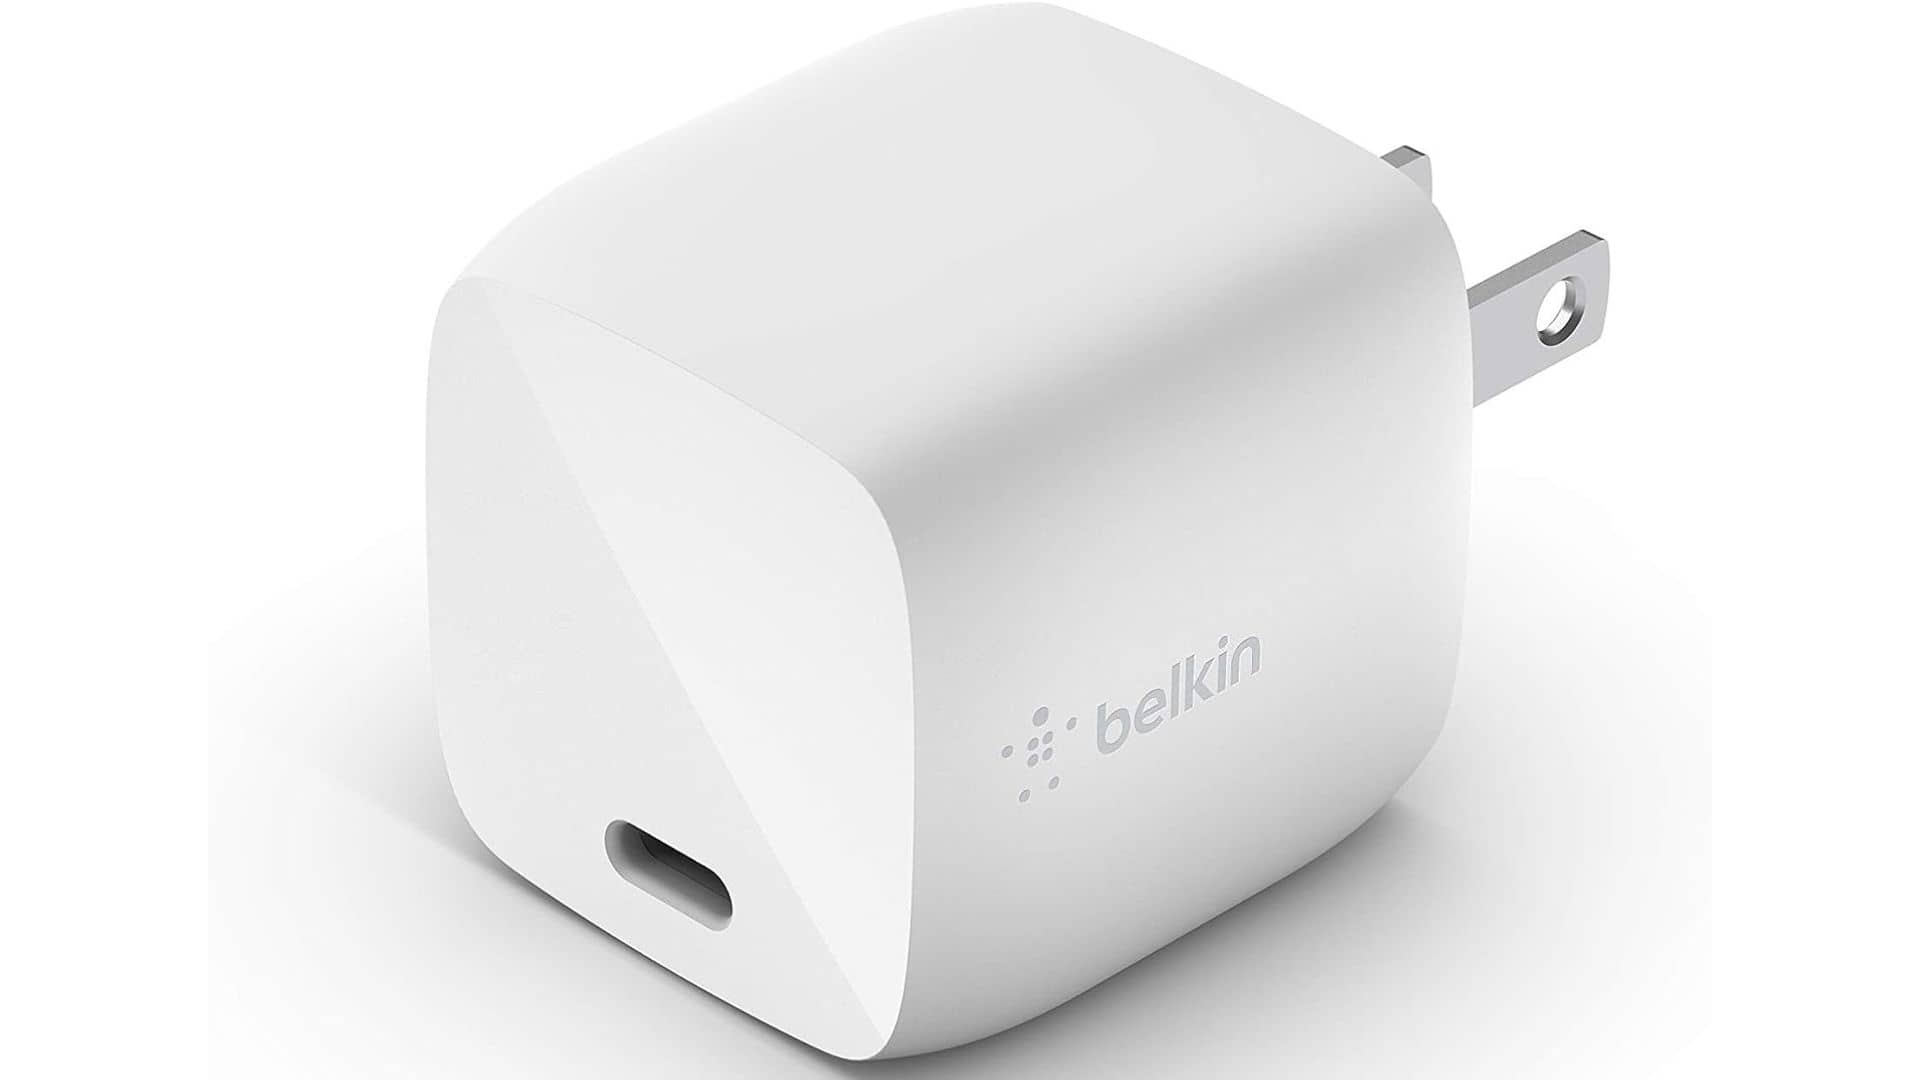 Belkin BoostCharge 30W GaN Charger - The Perfect Charger for the Kitchen